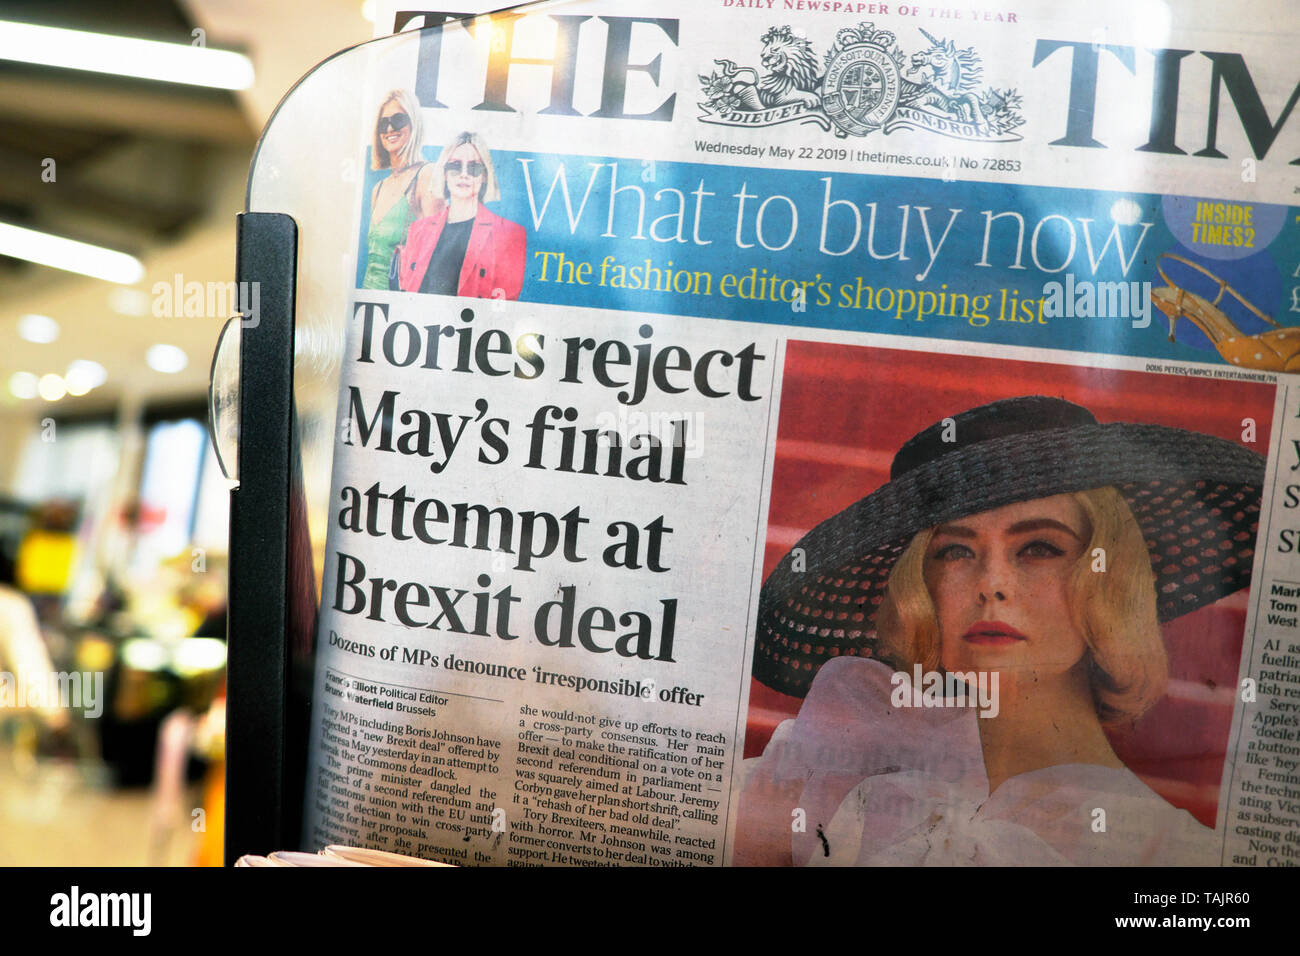 'Tories reject May's final attempt at Brexit deal' PM Theresa May Brexit withdrawal agreement failure on front page newspaper headline in The Times newspapers London England Britain UK GB Great Britain Europe EU Stock Photo